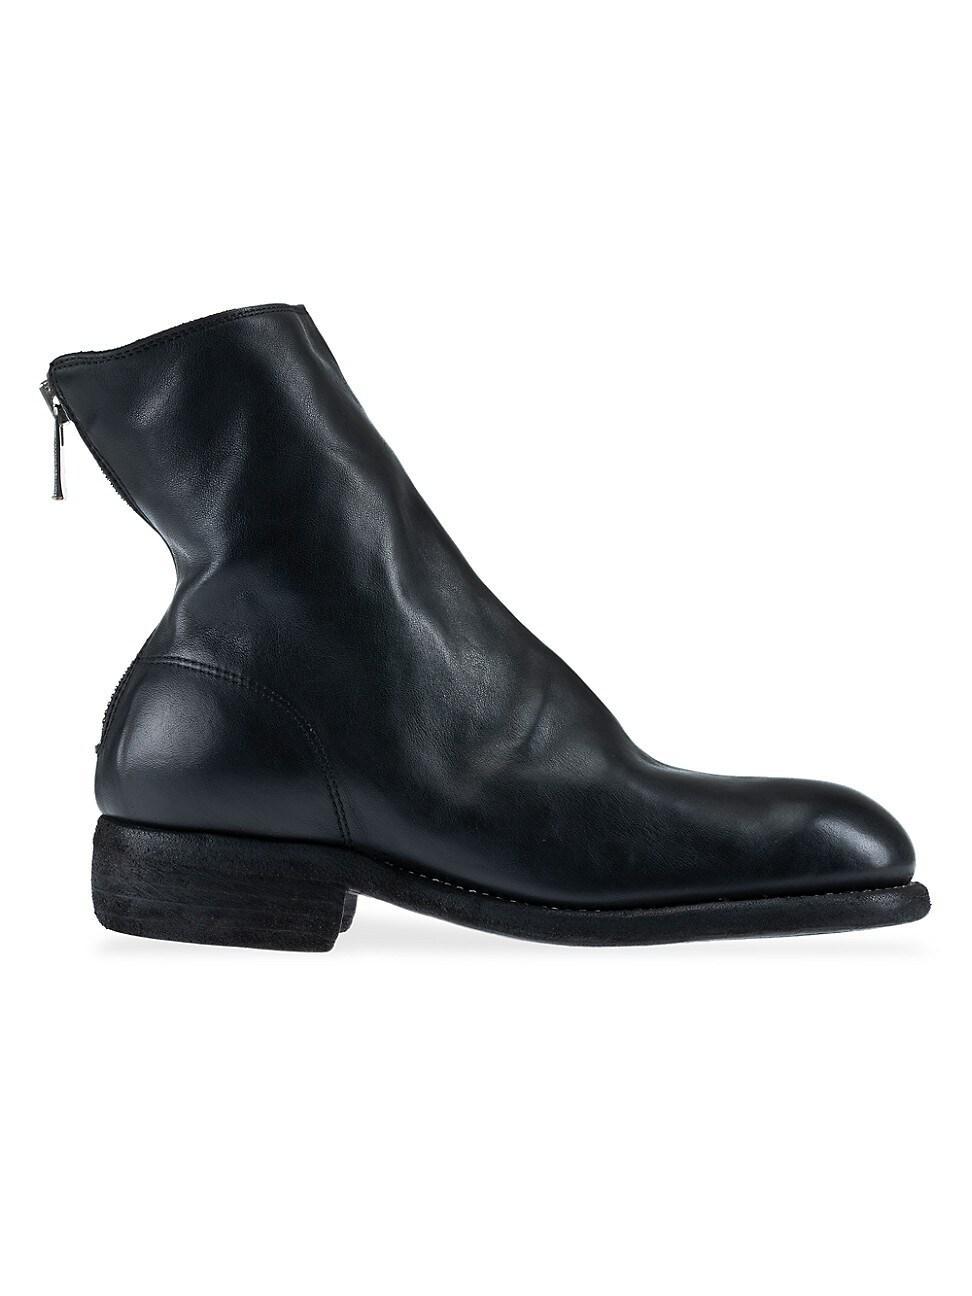 Mens Leather Back Zip Boots Product Image